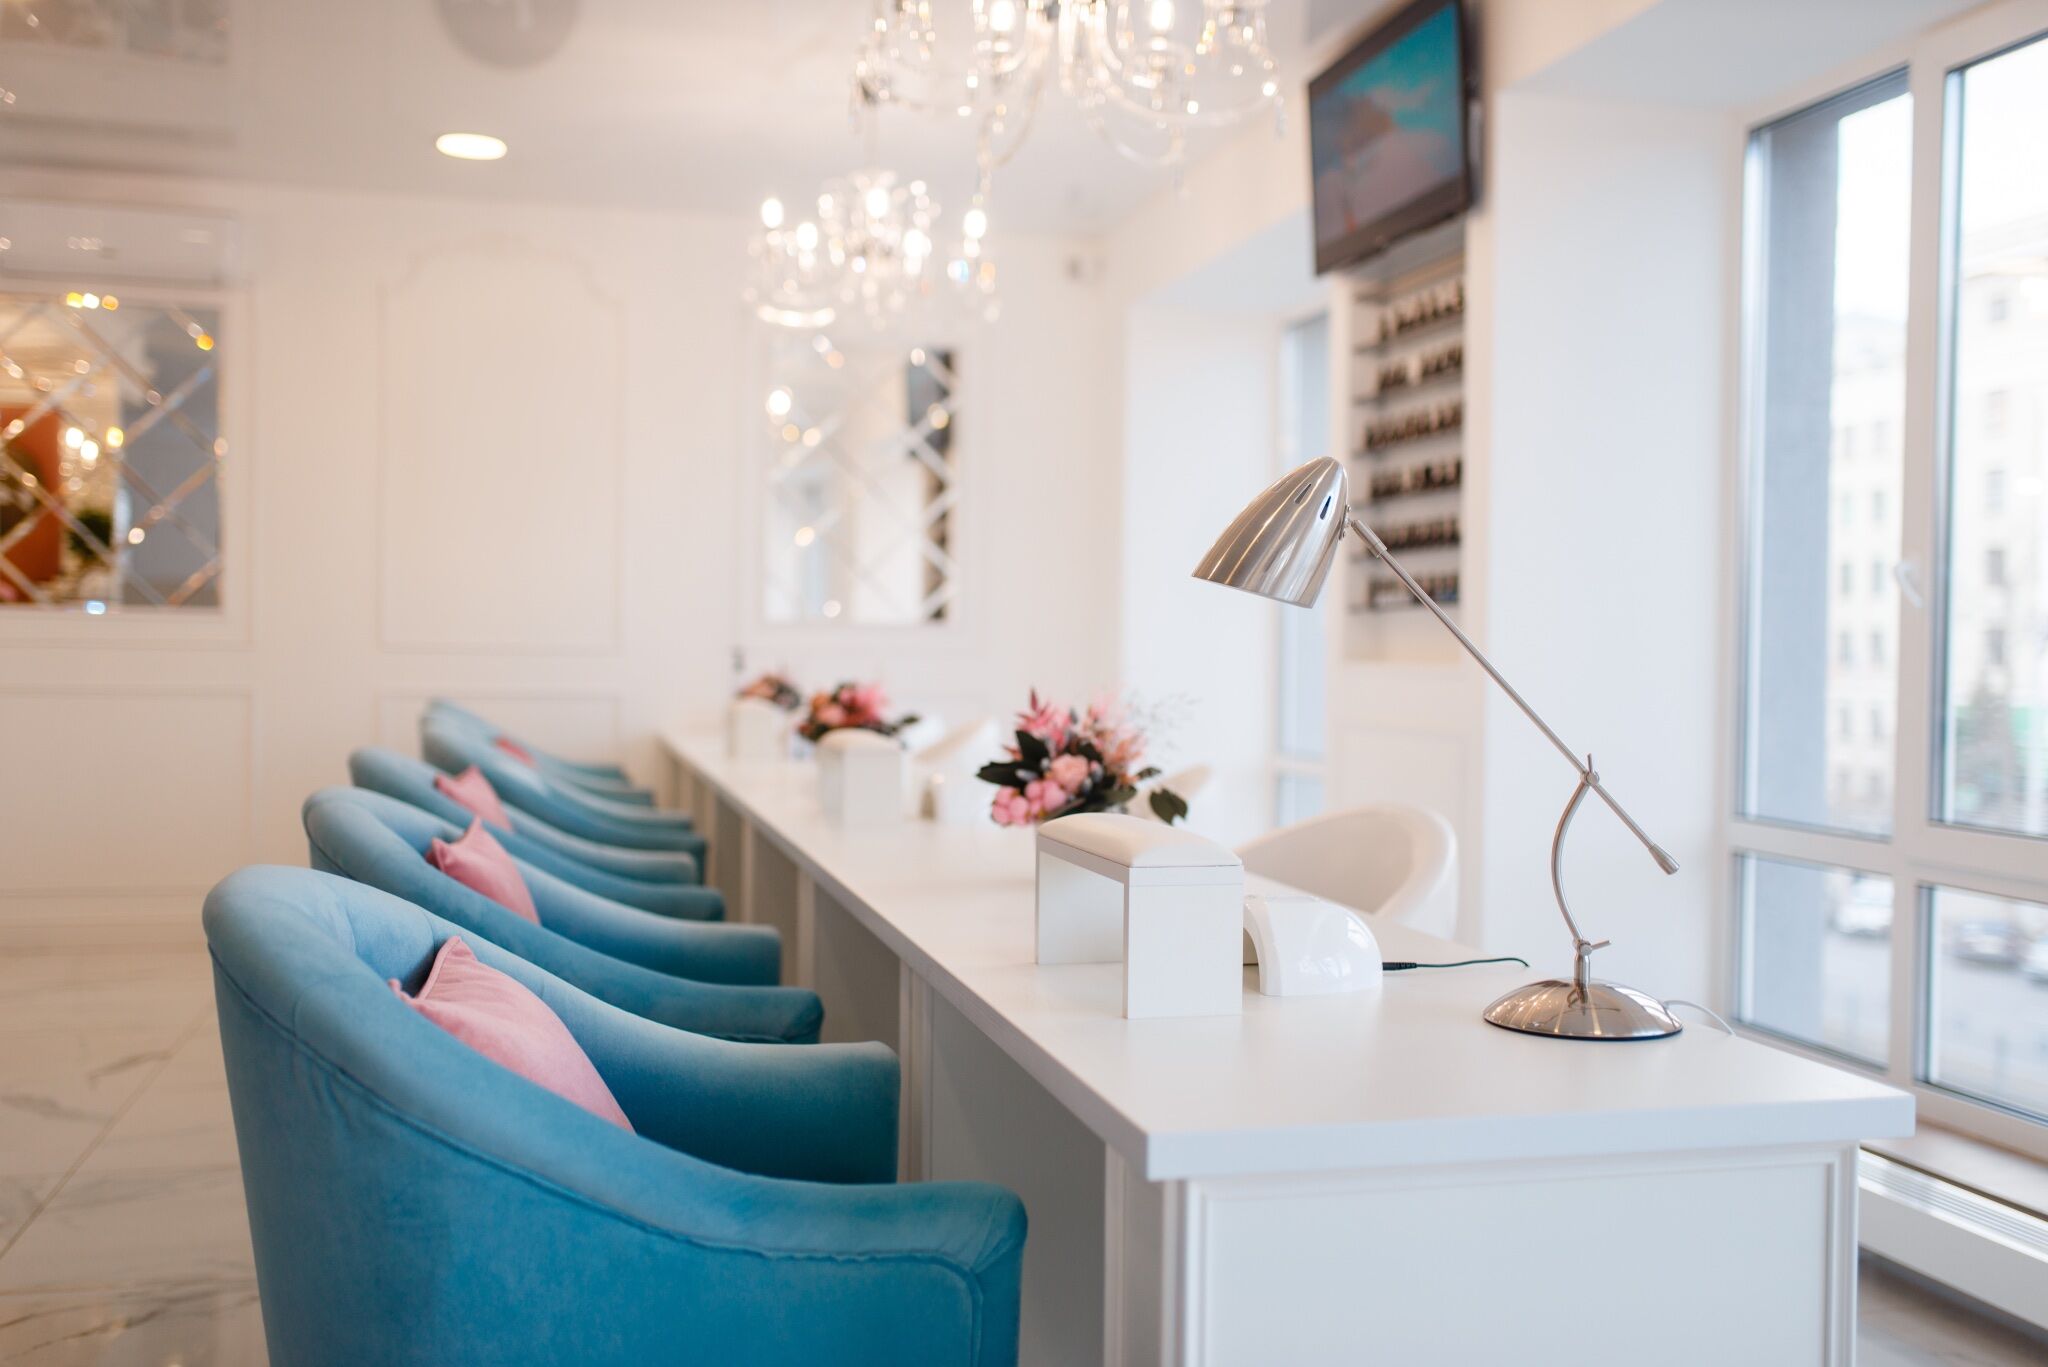 How to Become a Successful Nail Technician in Florida?